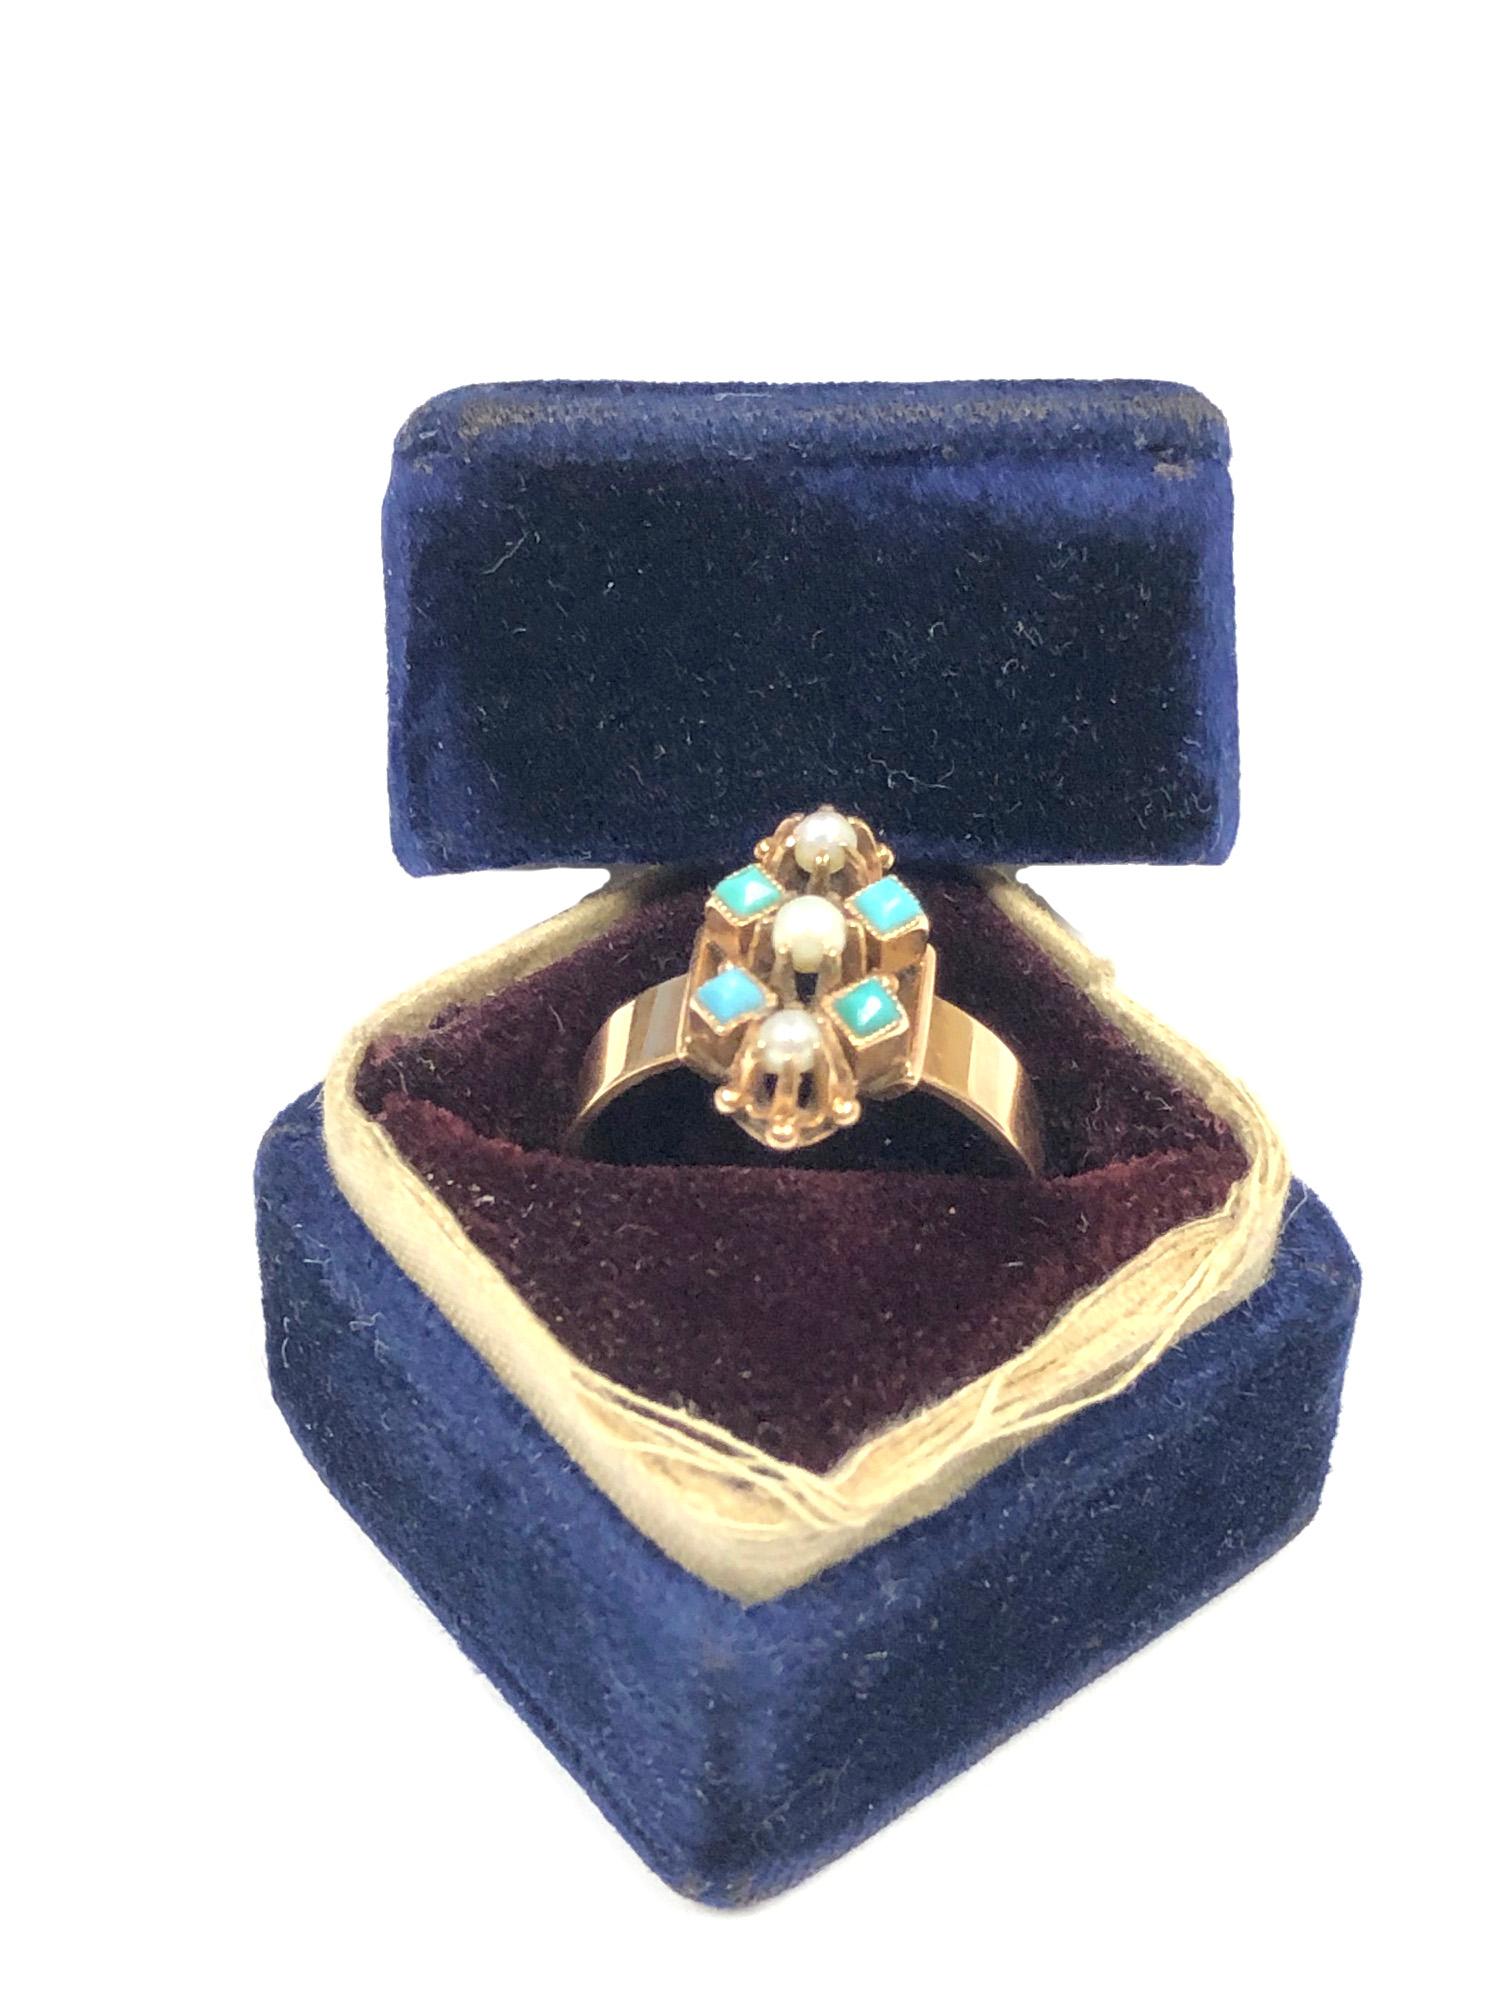 Women's Victorian Gold Pearl and Turquoise Ring in Original Gift Box